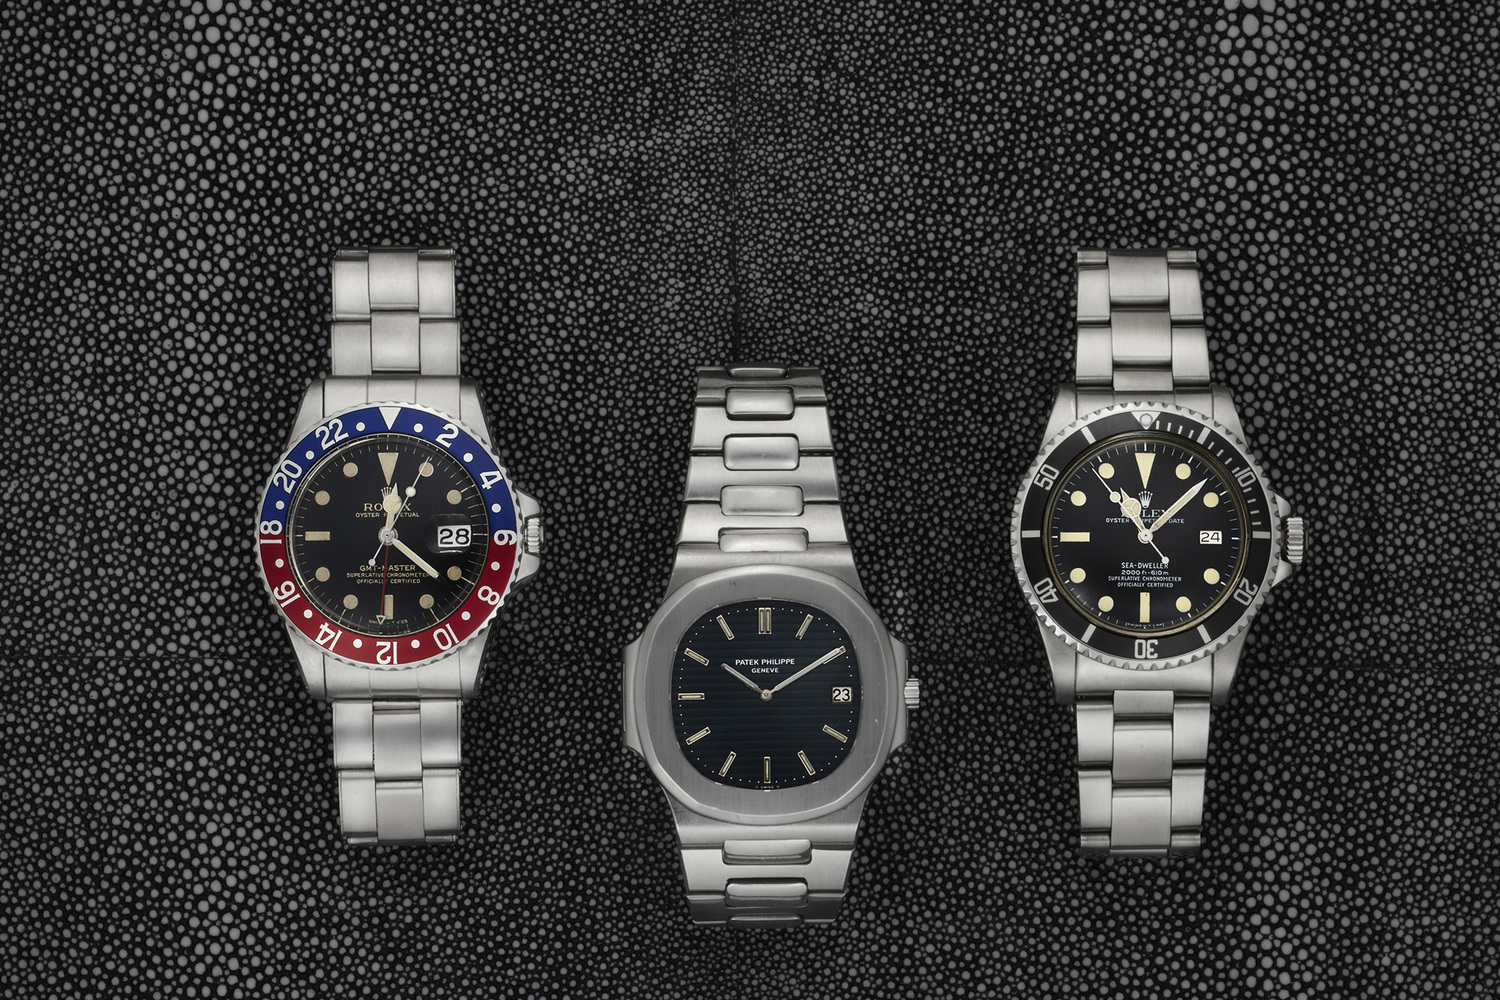 Tudor Black Bay One: 5 Reasons to Bid at the 'Only Watch' Auction